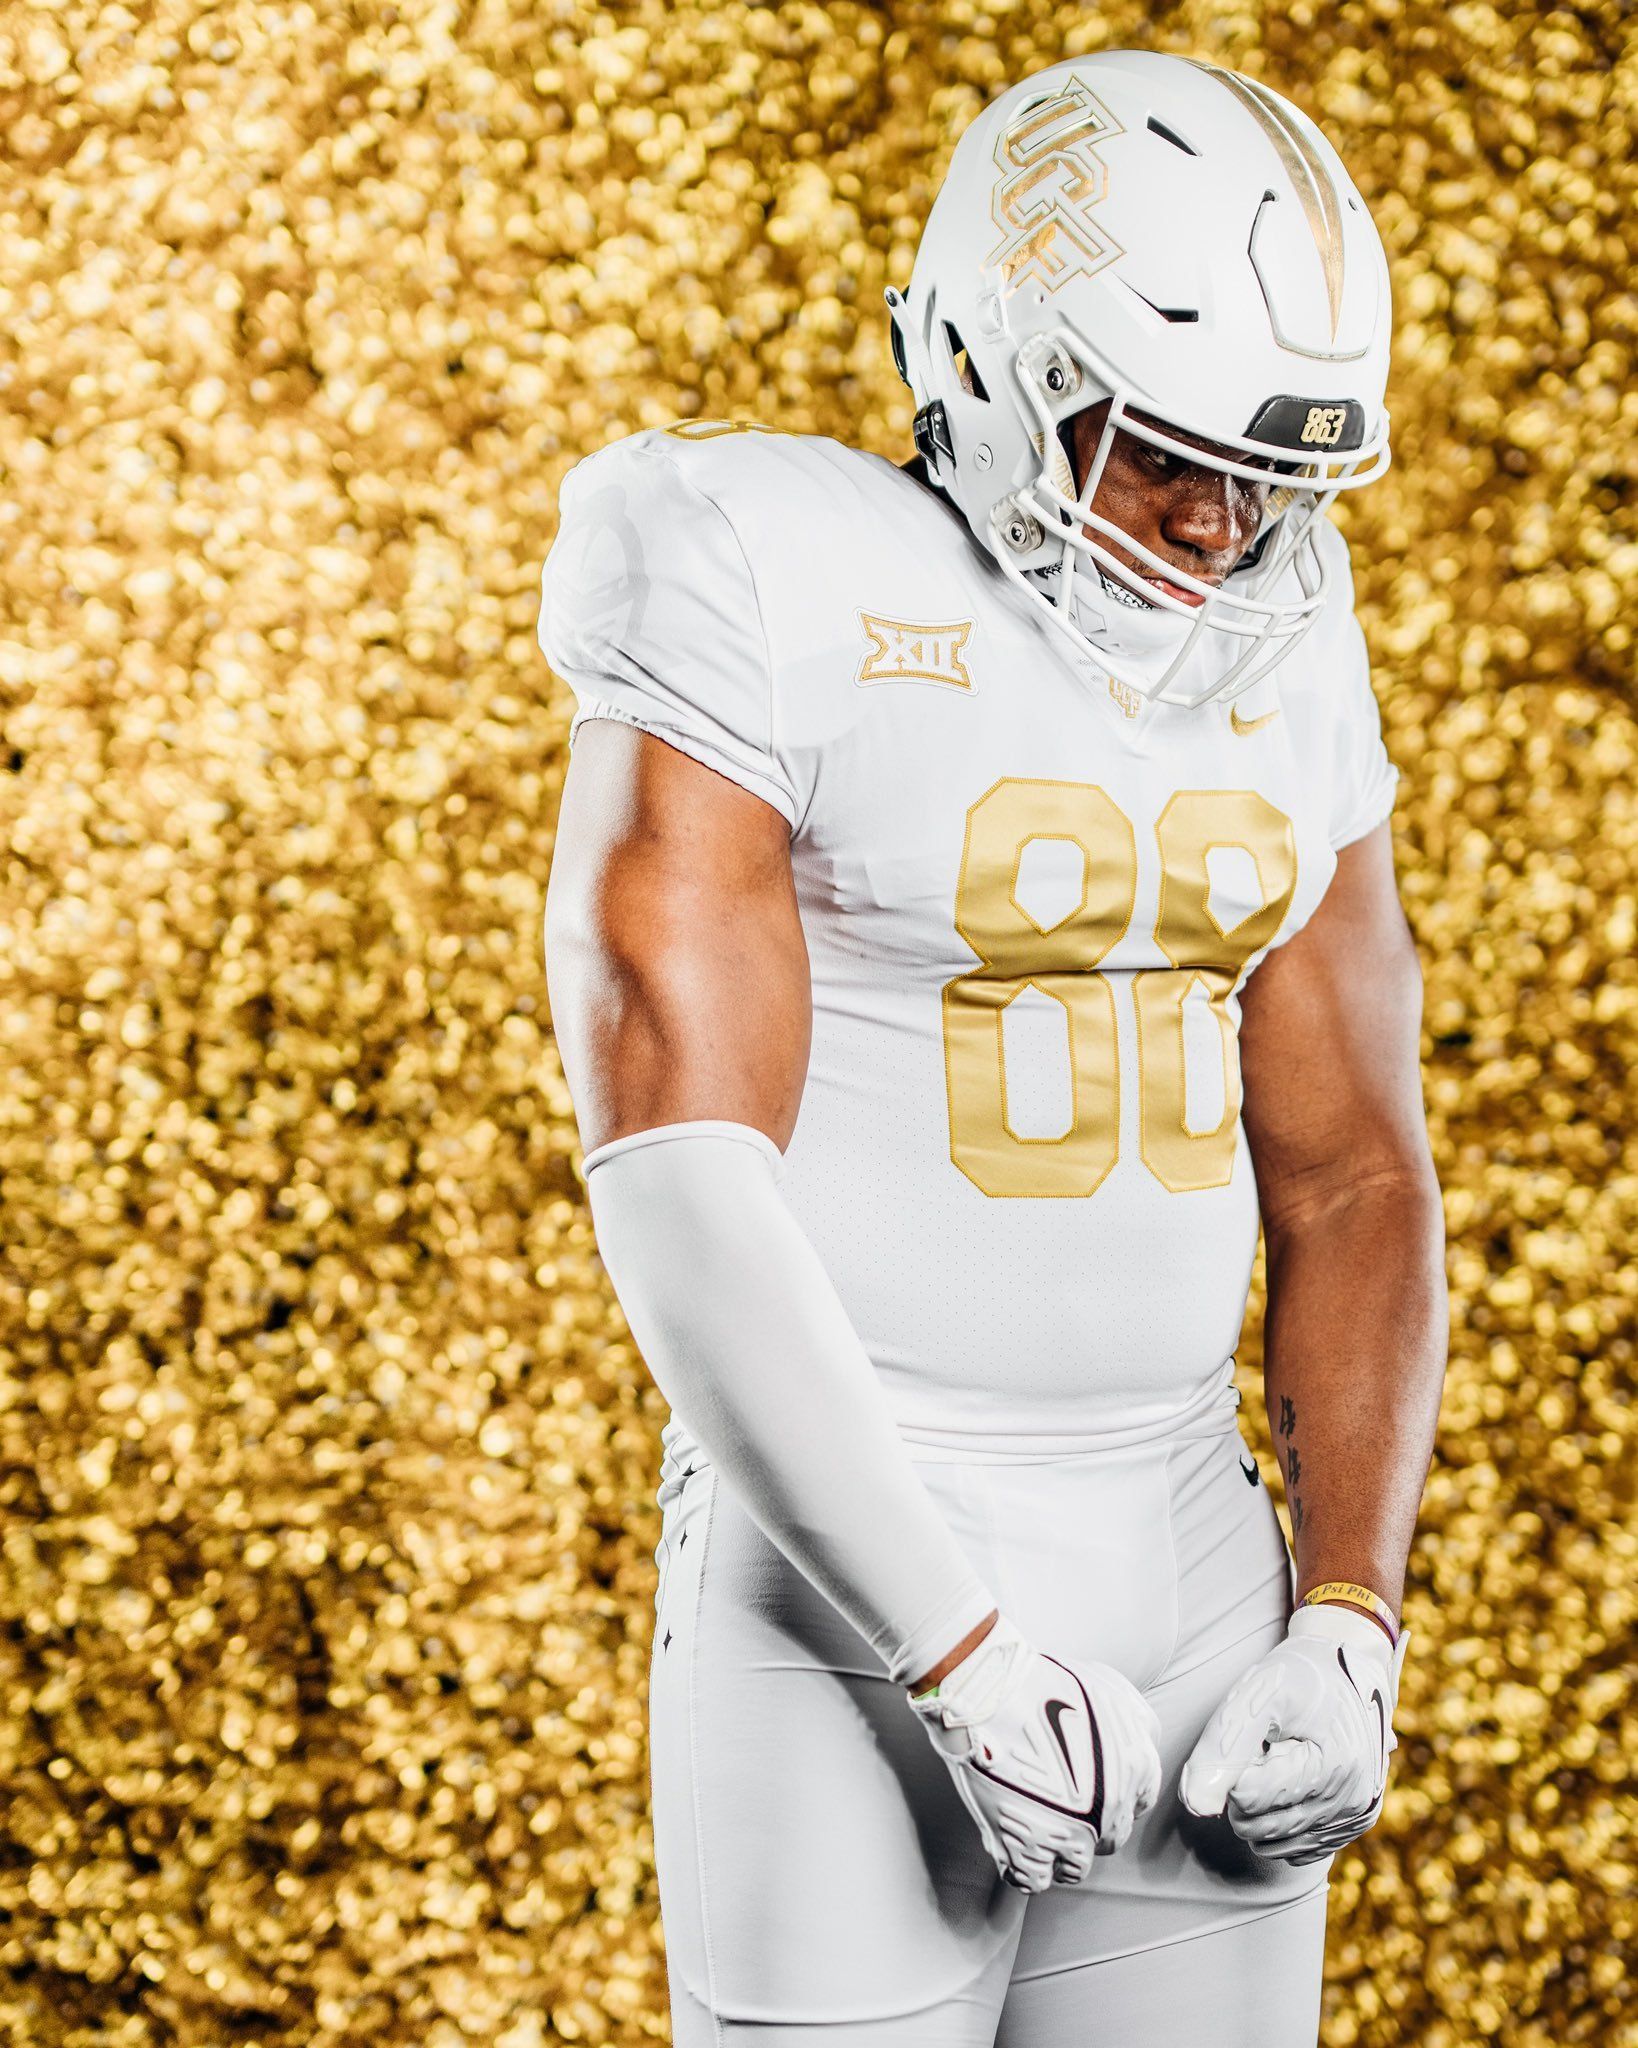 Ranking the Top 10 New College Football Uniforms for 2023 - Sports